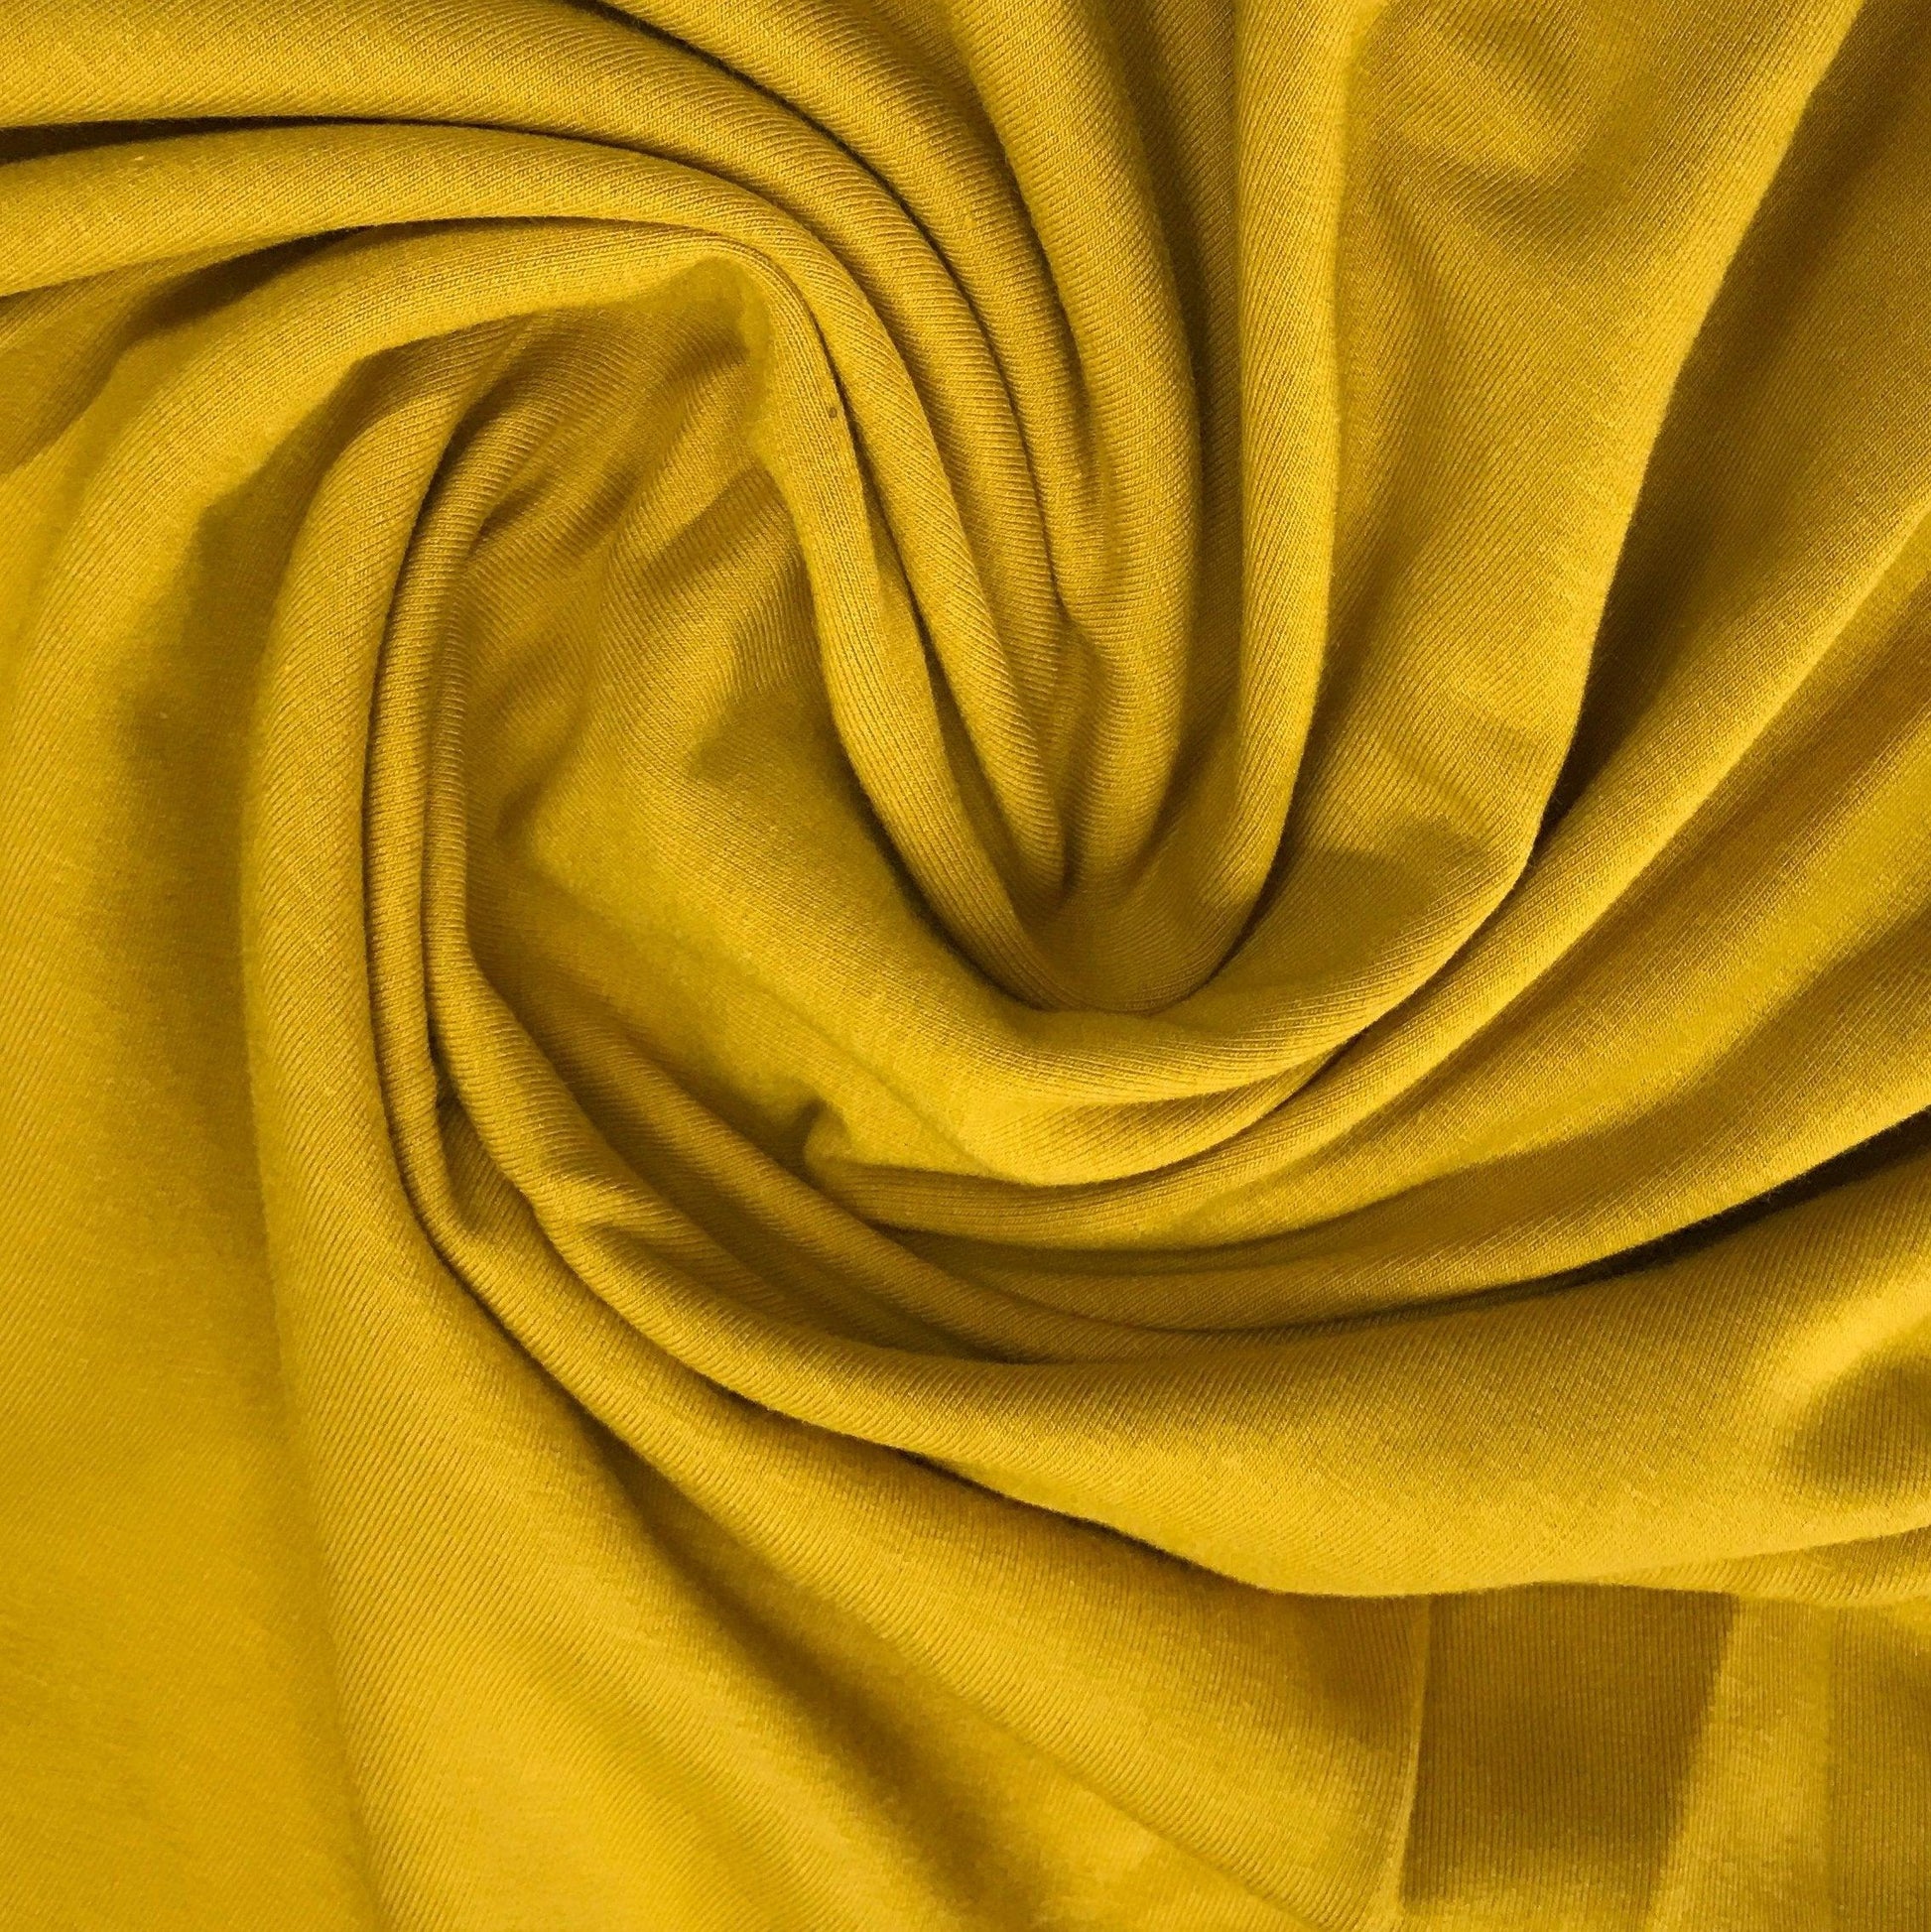 Nugget Gold Bamboo Stretch French Terry Fabric - 265 GSM, $10.86/yd - Rolls - Nature's Fabrics